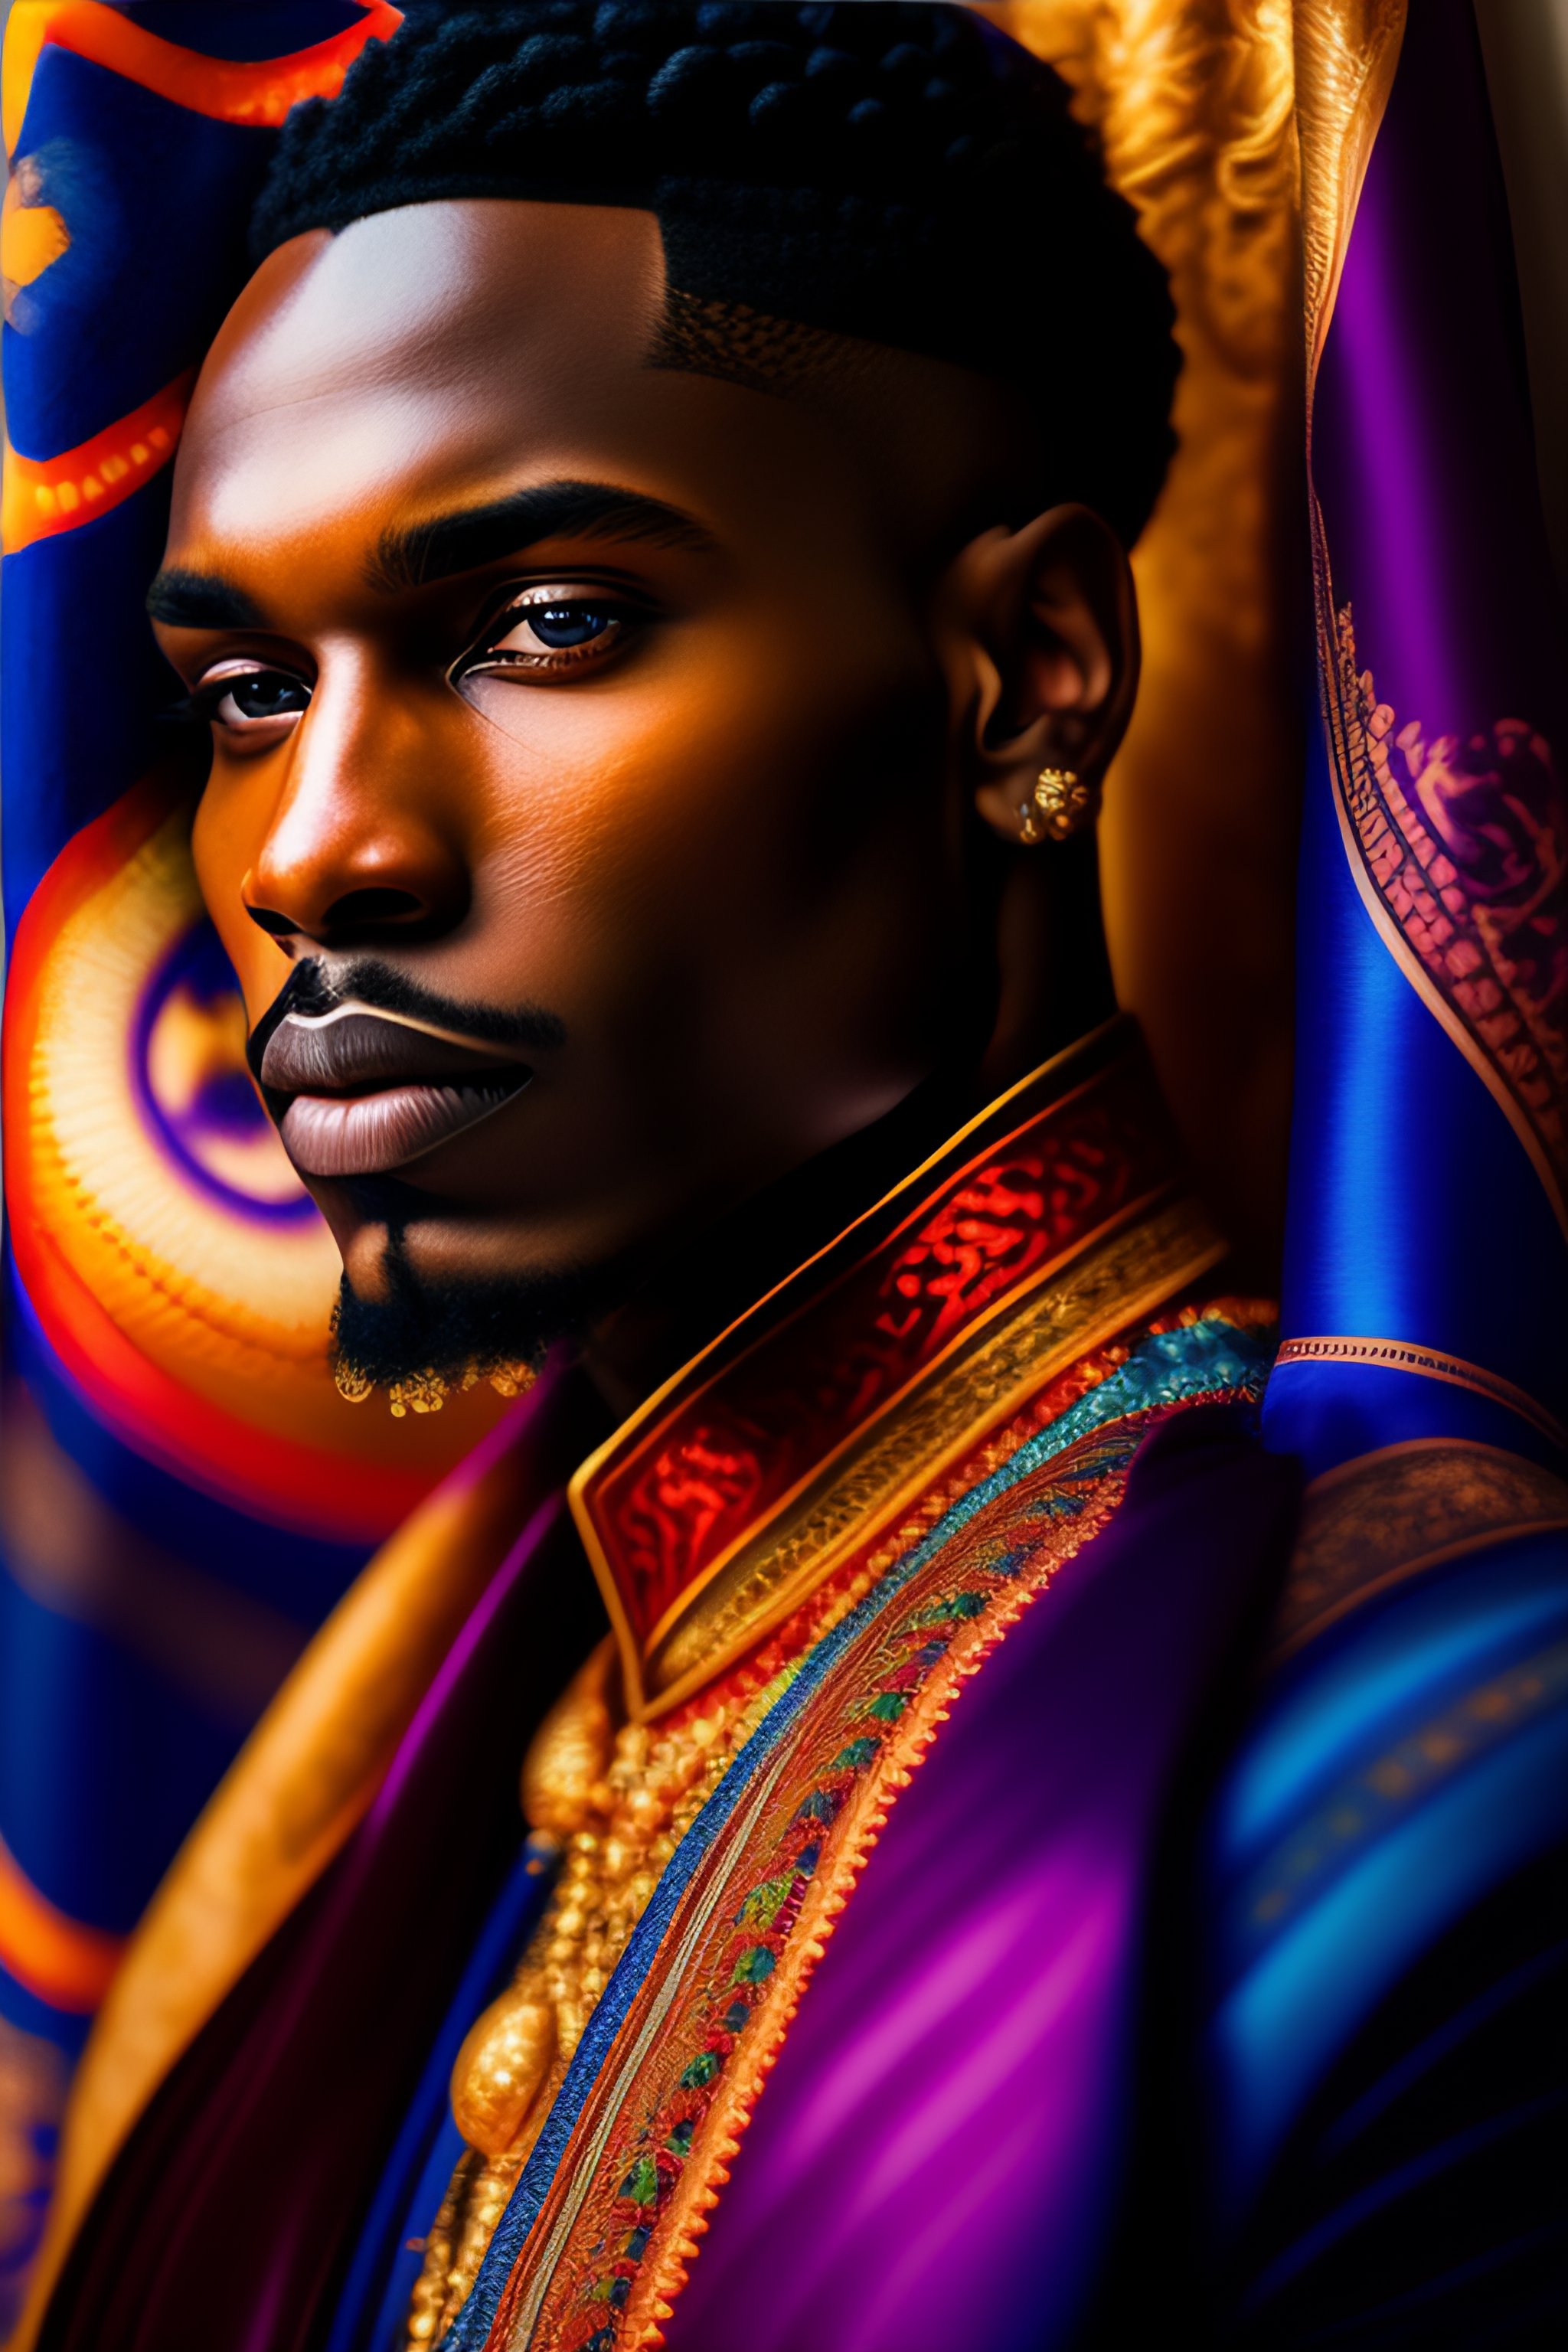 Lexica A Beautiful And Mysterious Melanated Man In An Intricate And Colorful Gown No Blur 7268